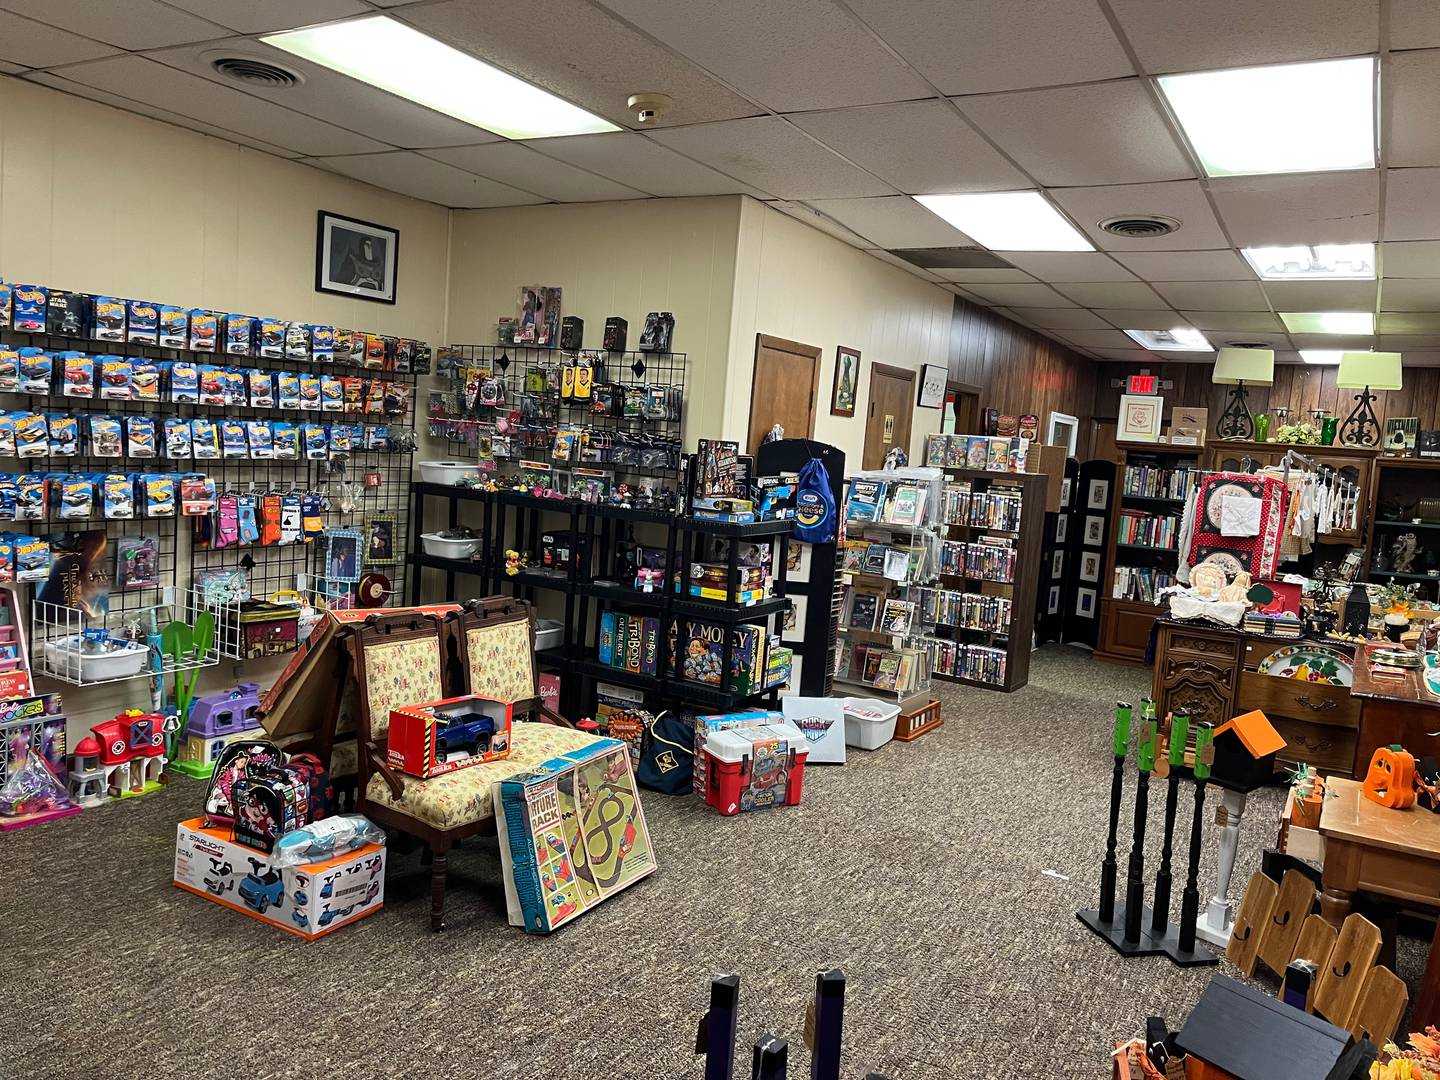 Many vendors are located inside Whatnots, a new store in downtown La Salle. This area of the store features many resale and collector items.